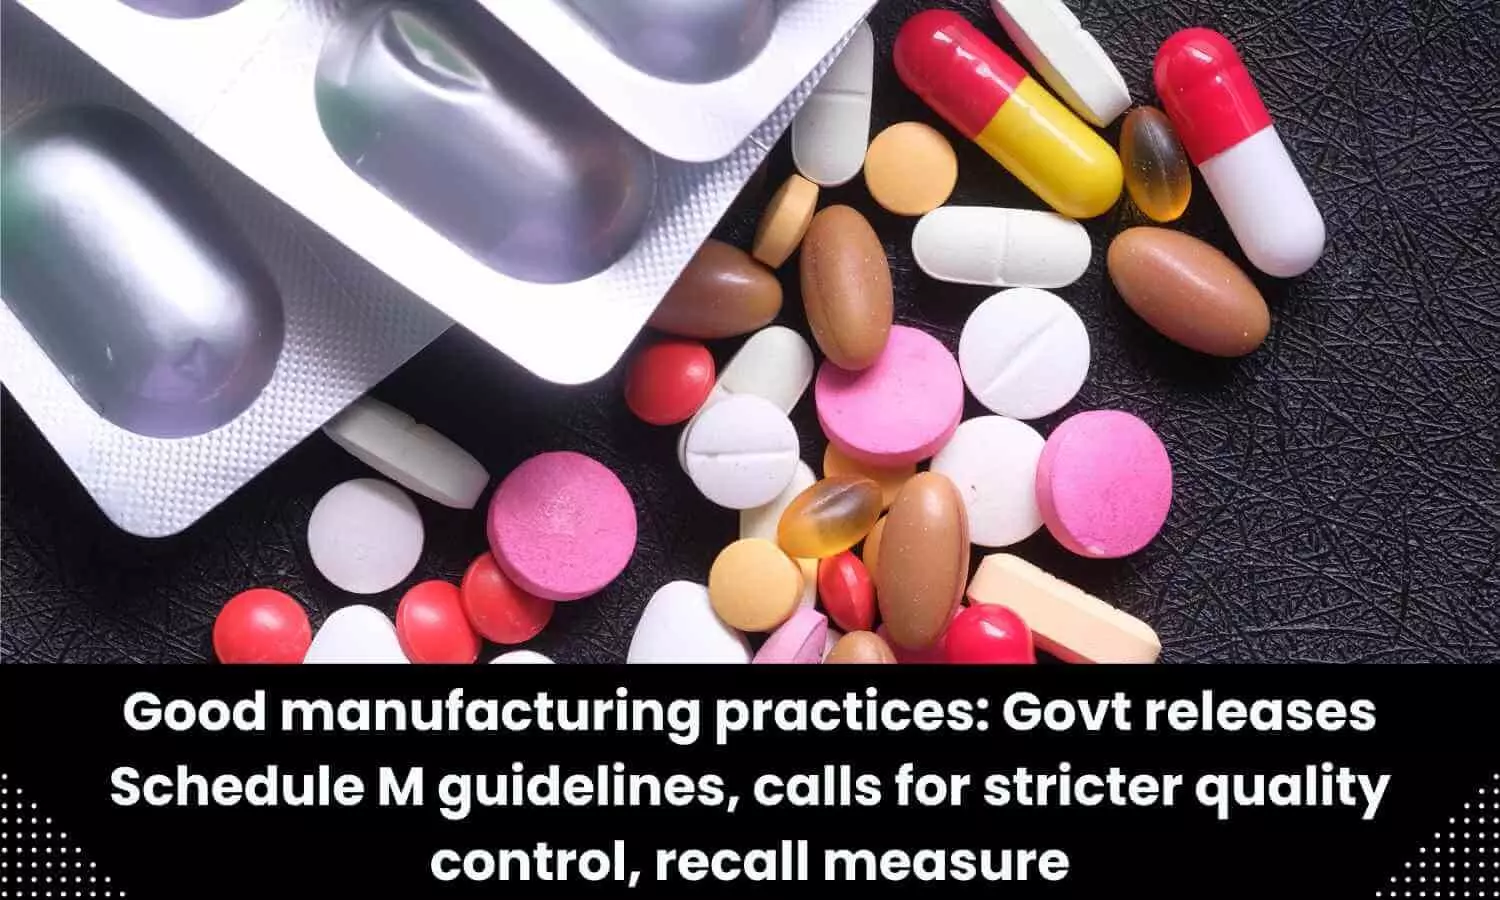 Govt releases Schedule M guidelines, calls for stricter quality control, recall measure